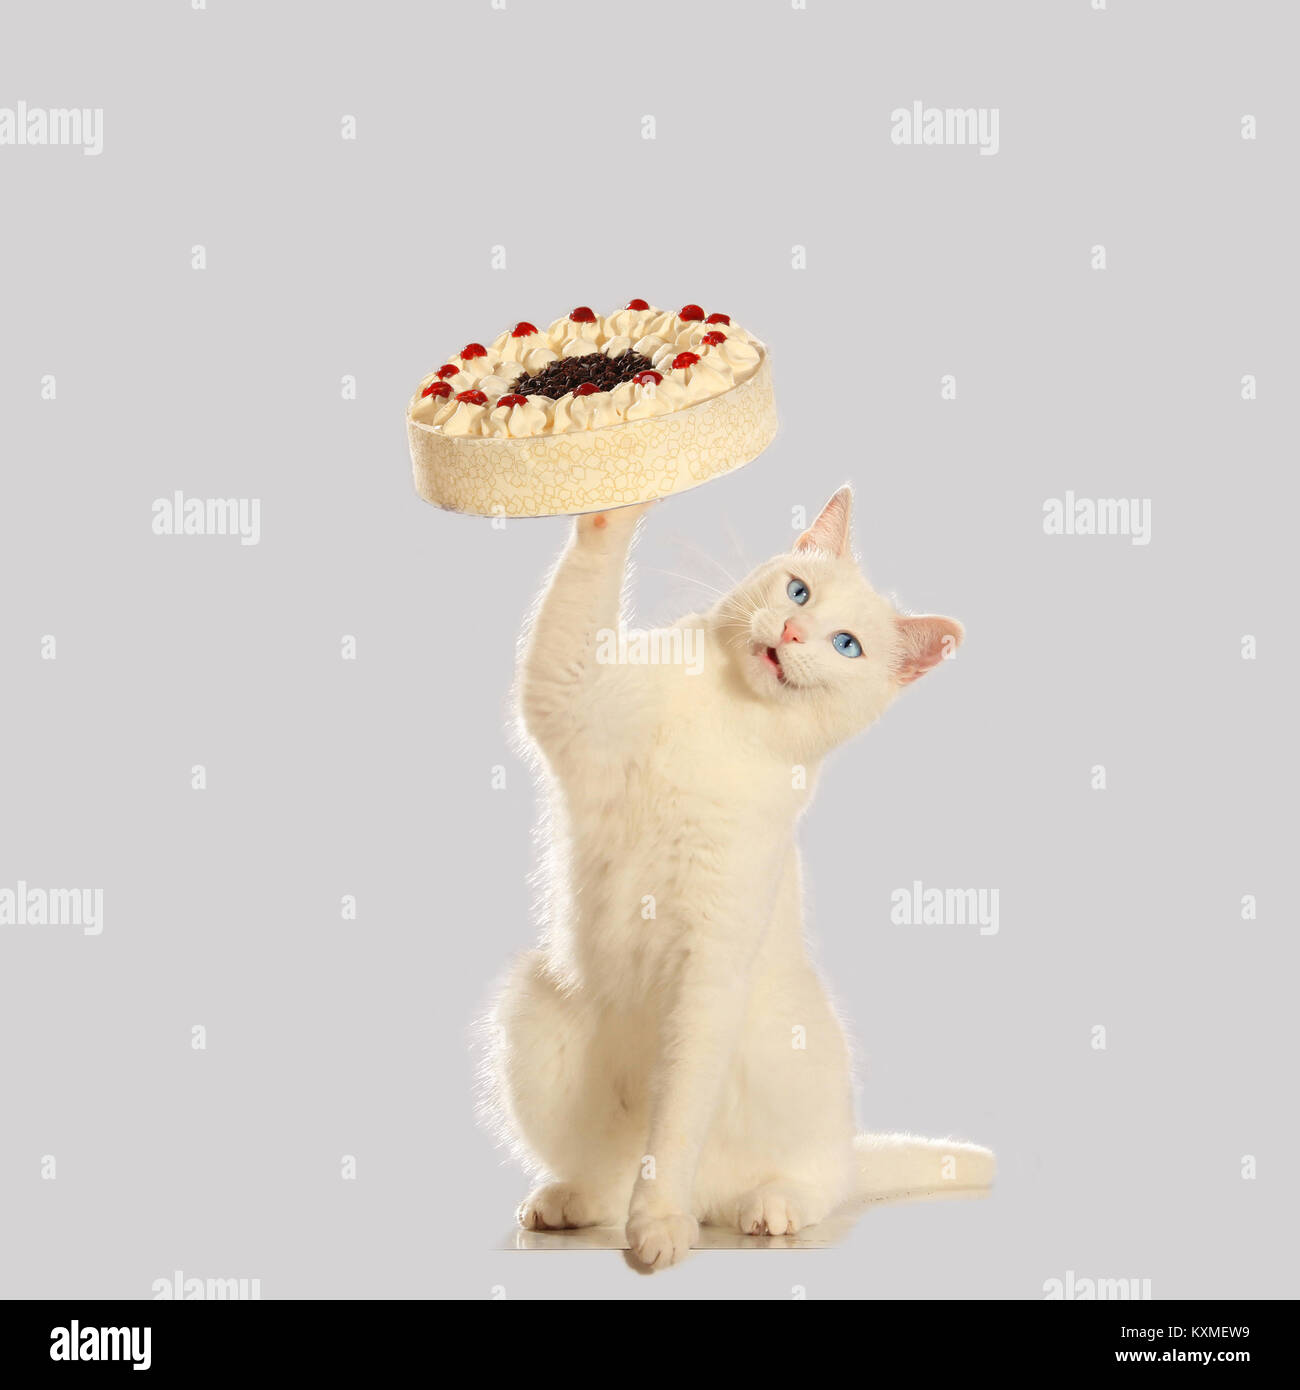 domestic cat, white, holding a cake Stock Photo